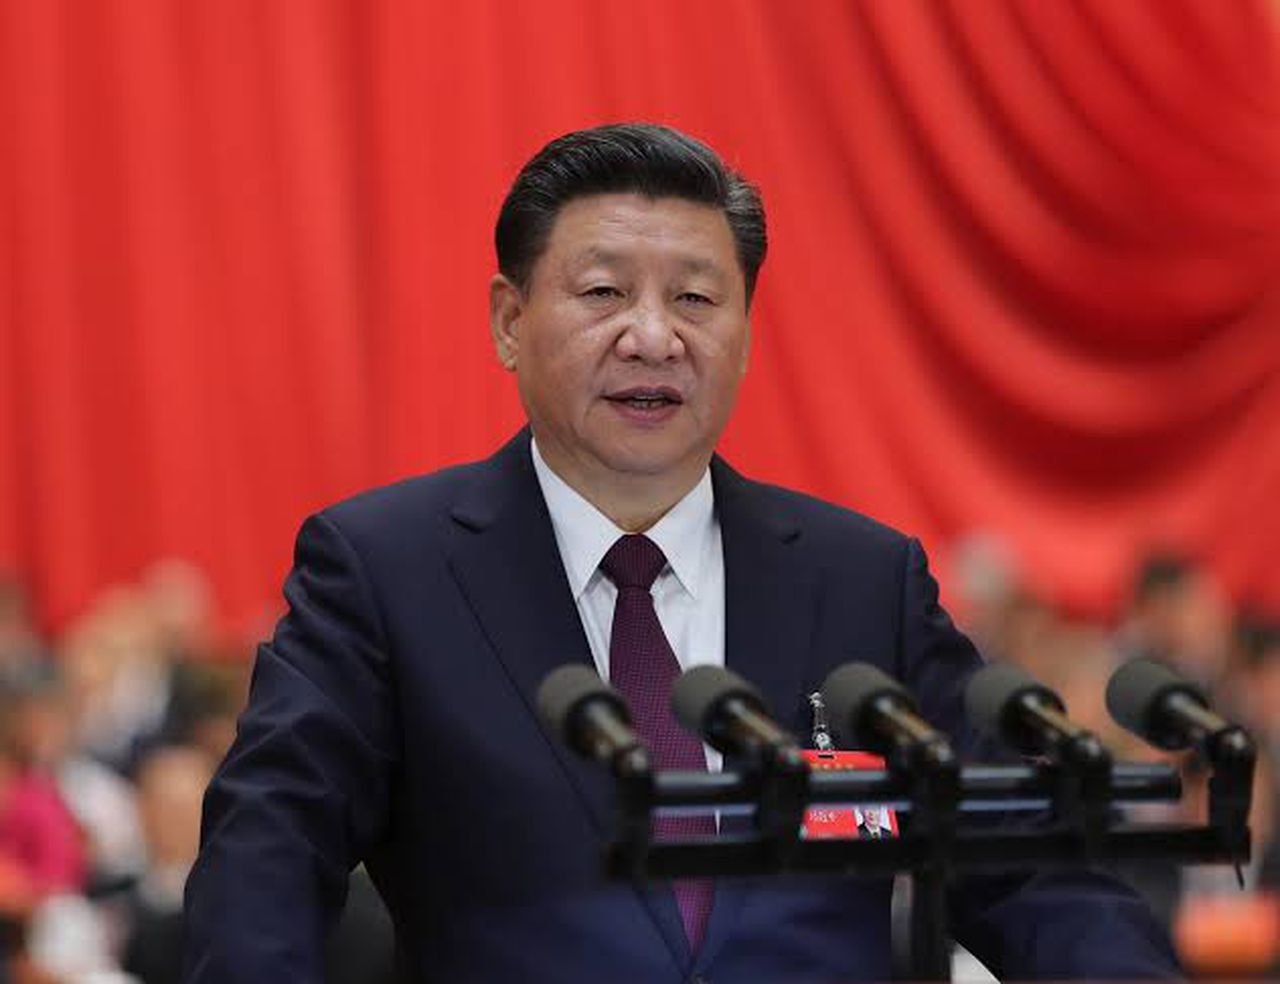 China accused the US of smearing its reputation, image via CNBC